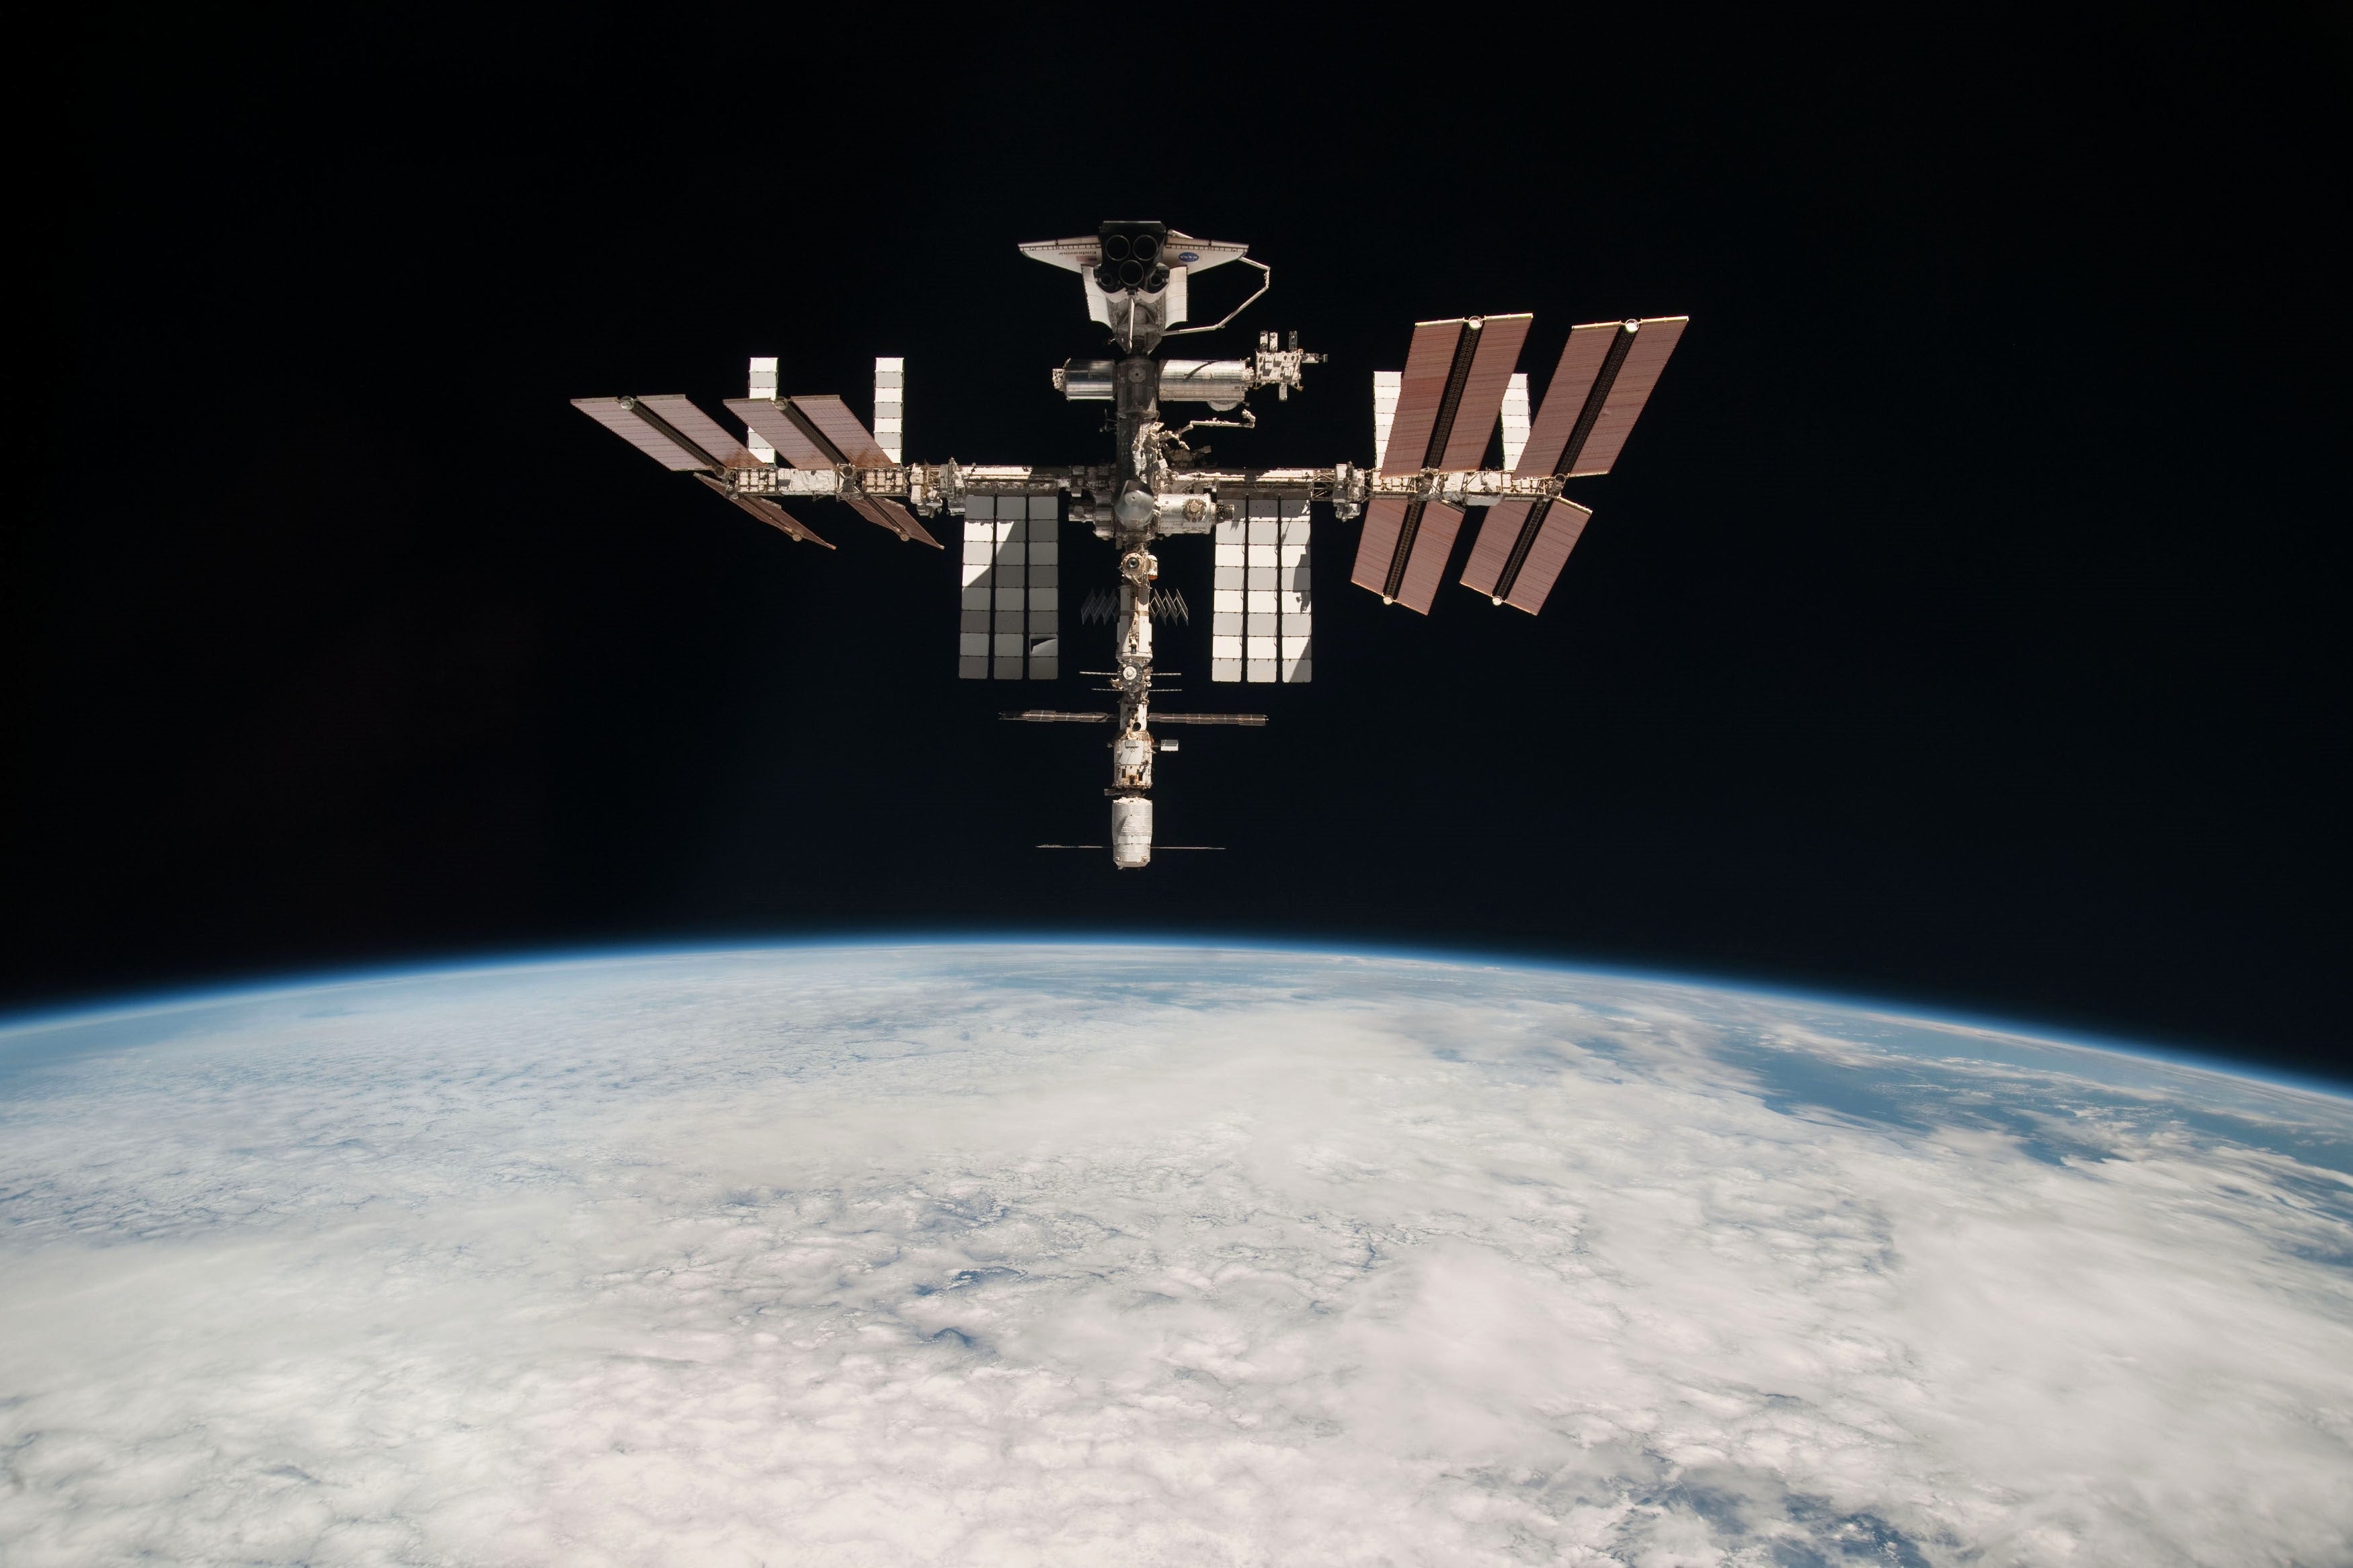 The International Space Station (ISS), which comes to the end of its operational life in 2030, is vulnerable to debris and defunct satellites